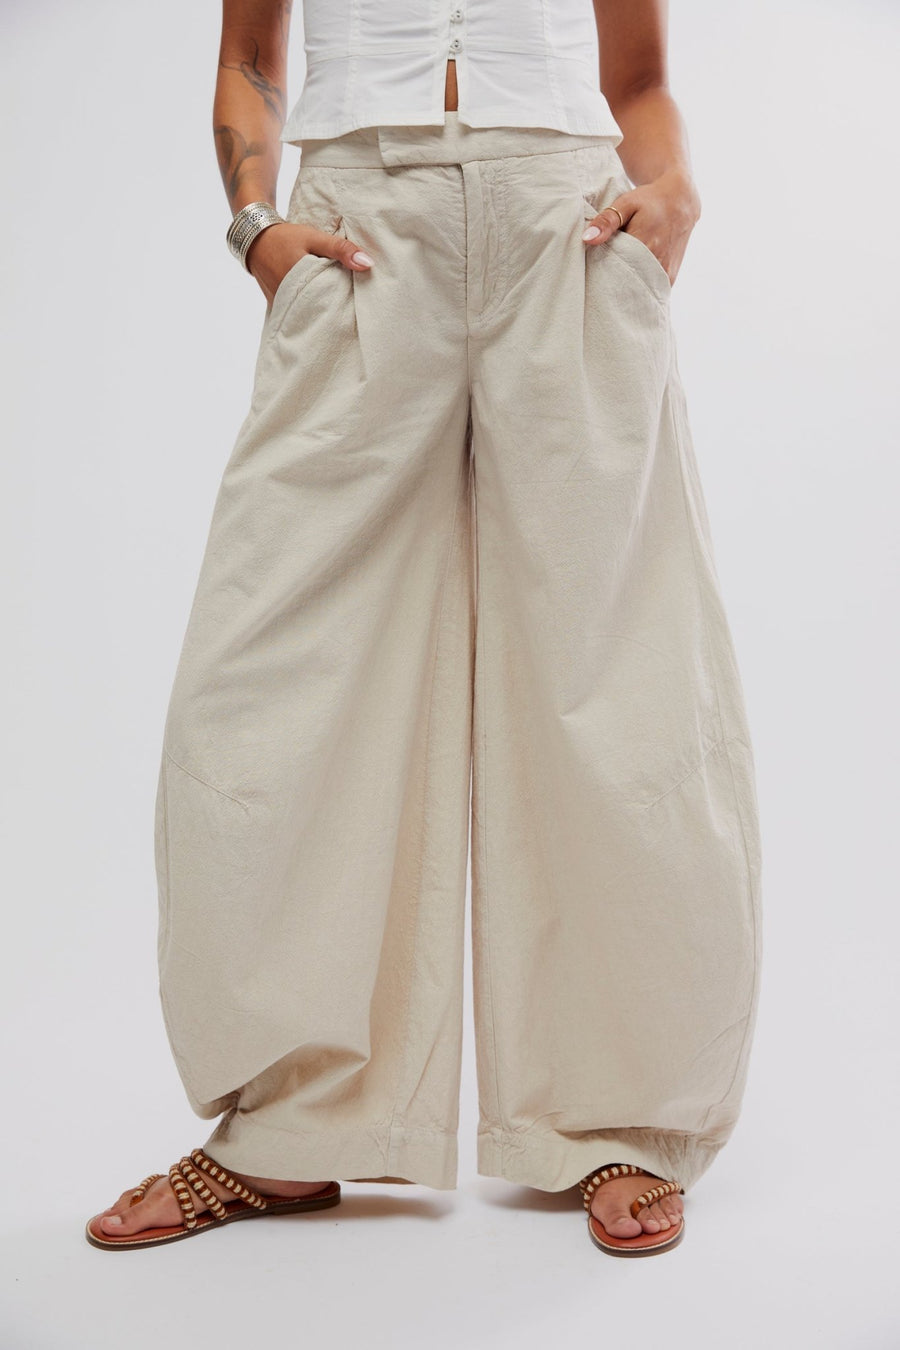 Tegan Washed Barrel Trousers by Free People - Blue Sky Fashions & Lingerie